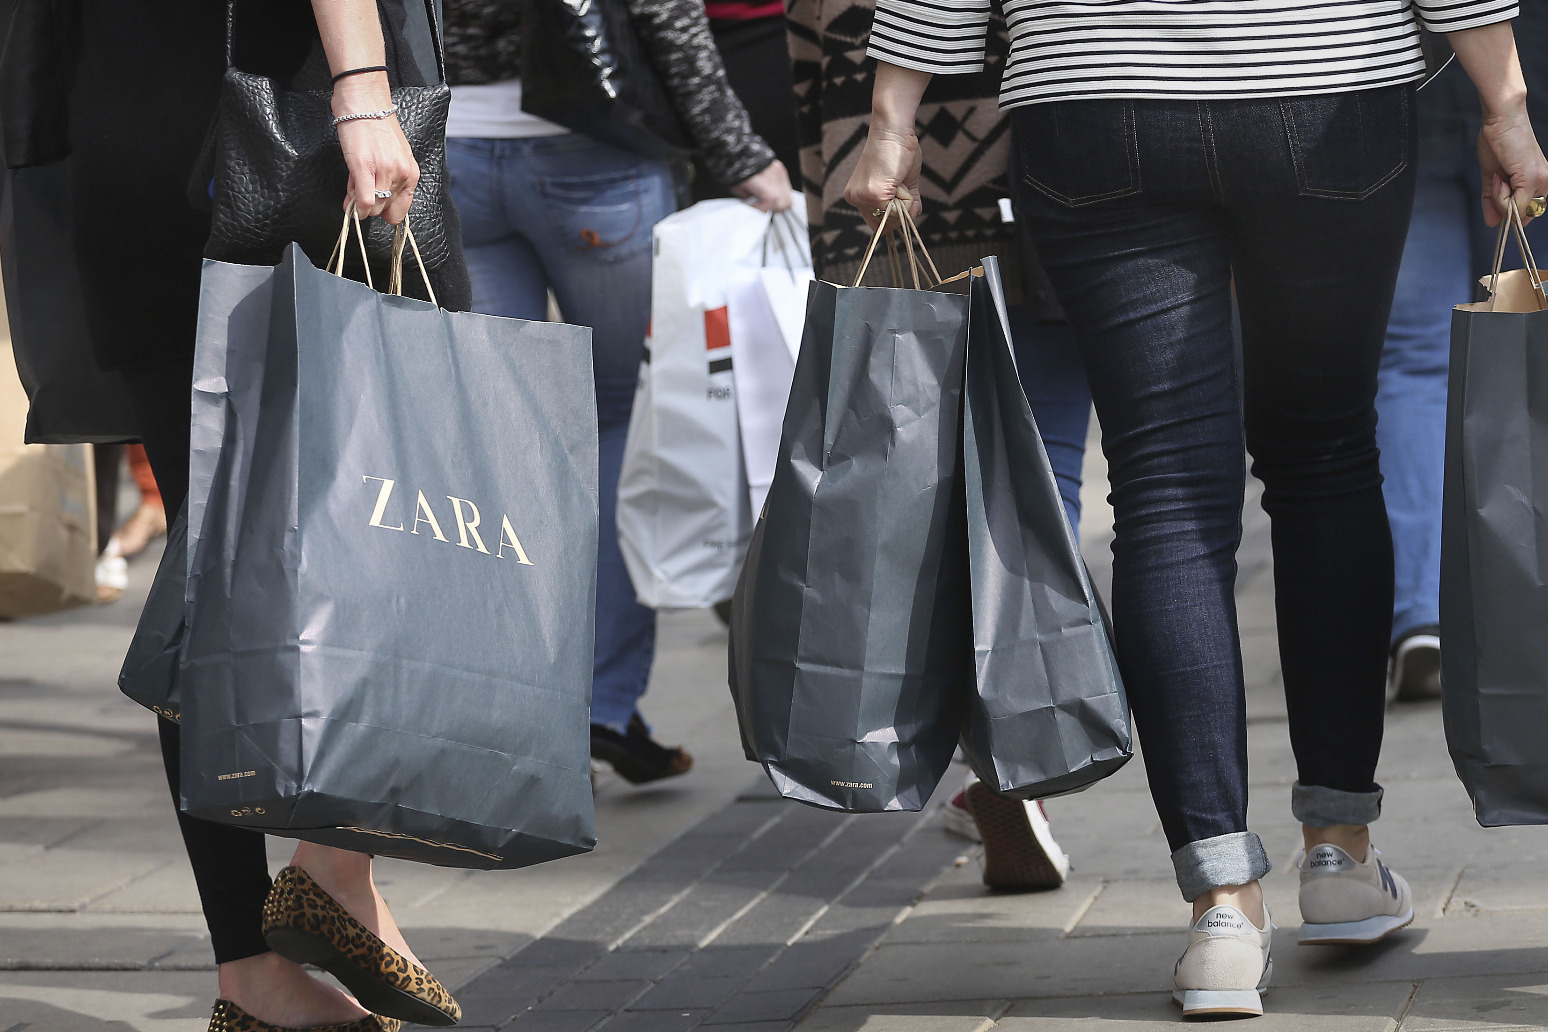 July washout helps drive down retail sales 